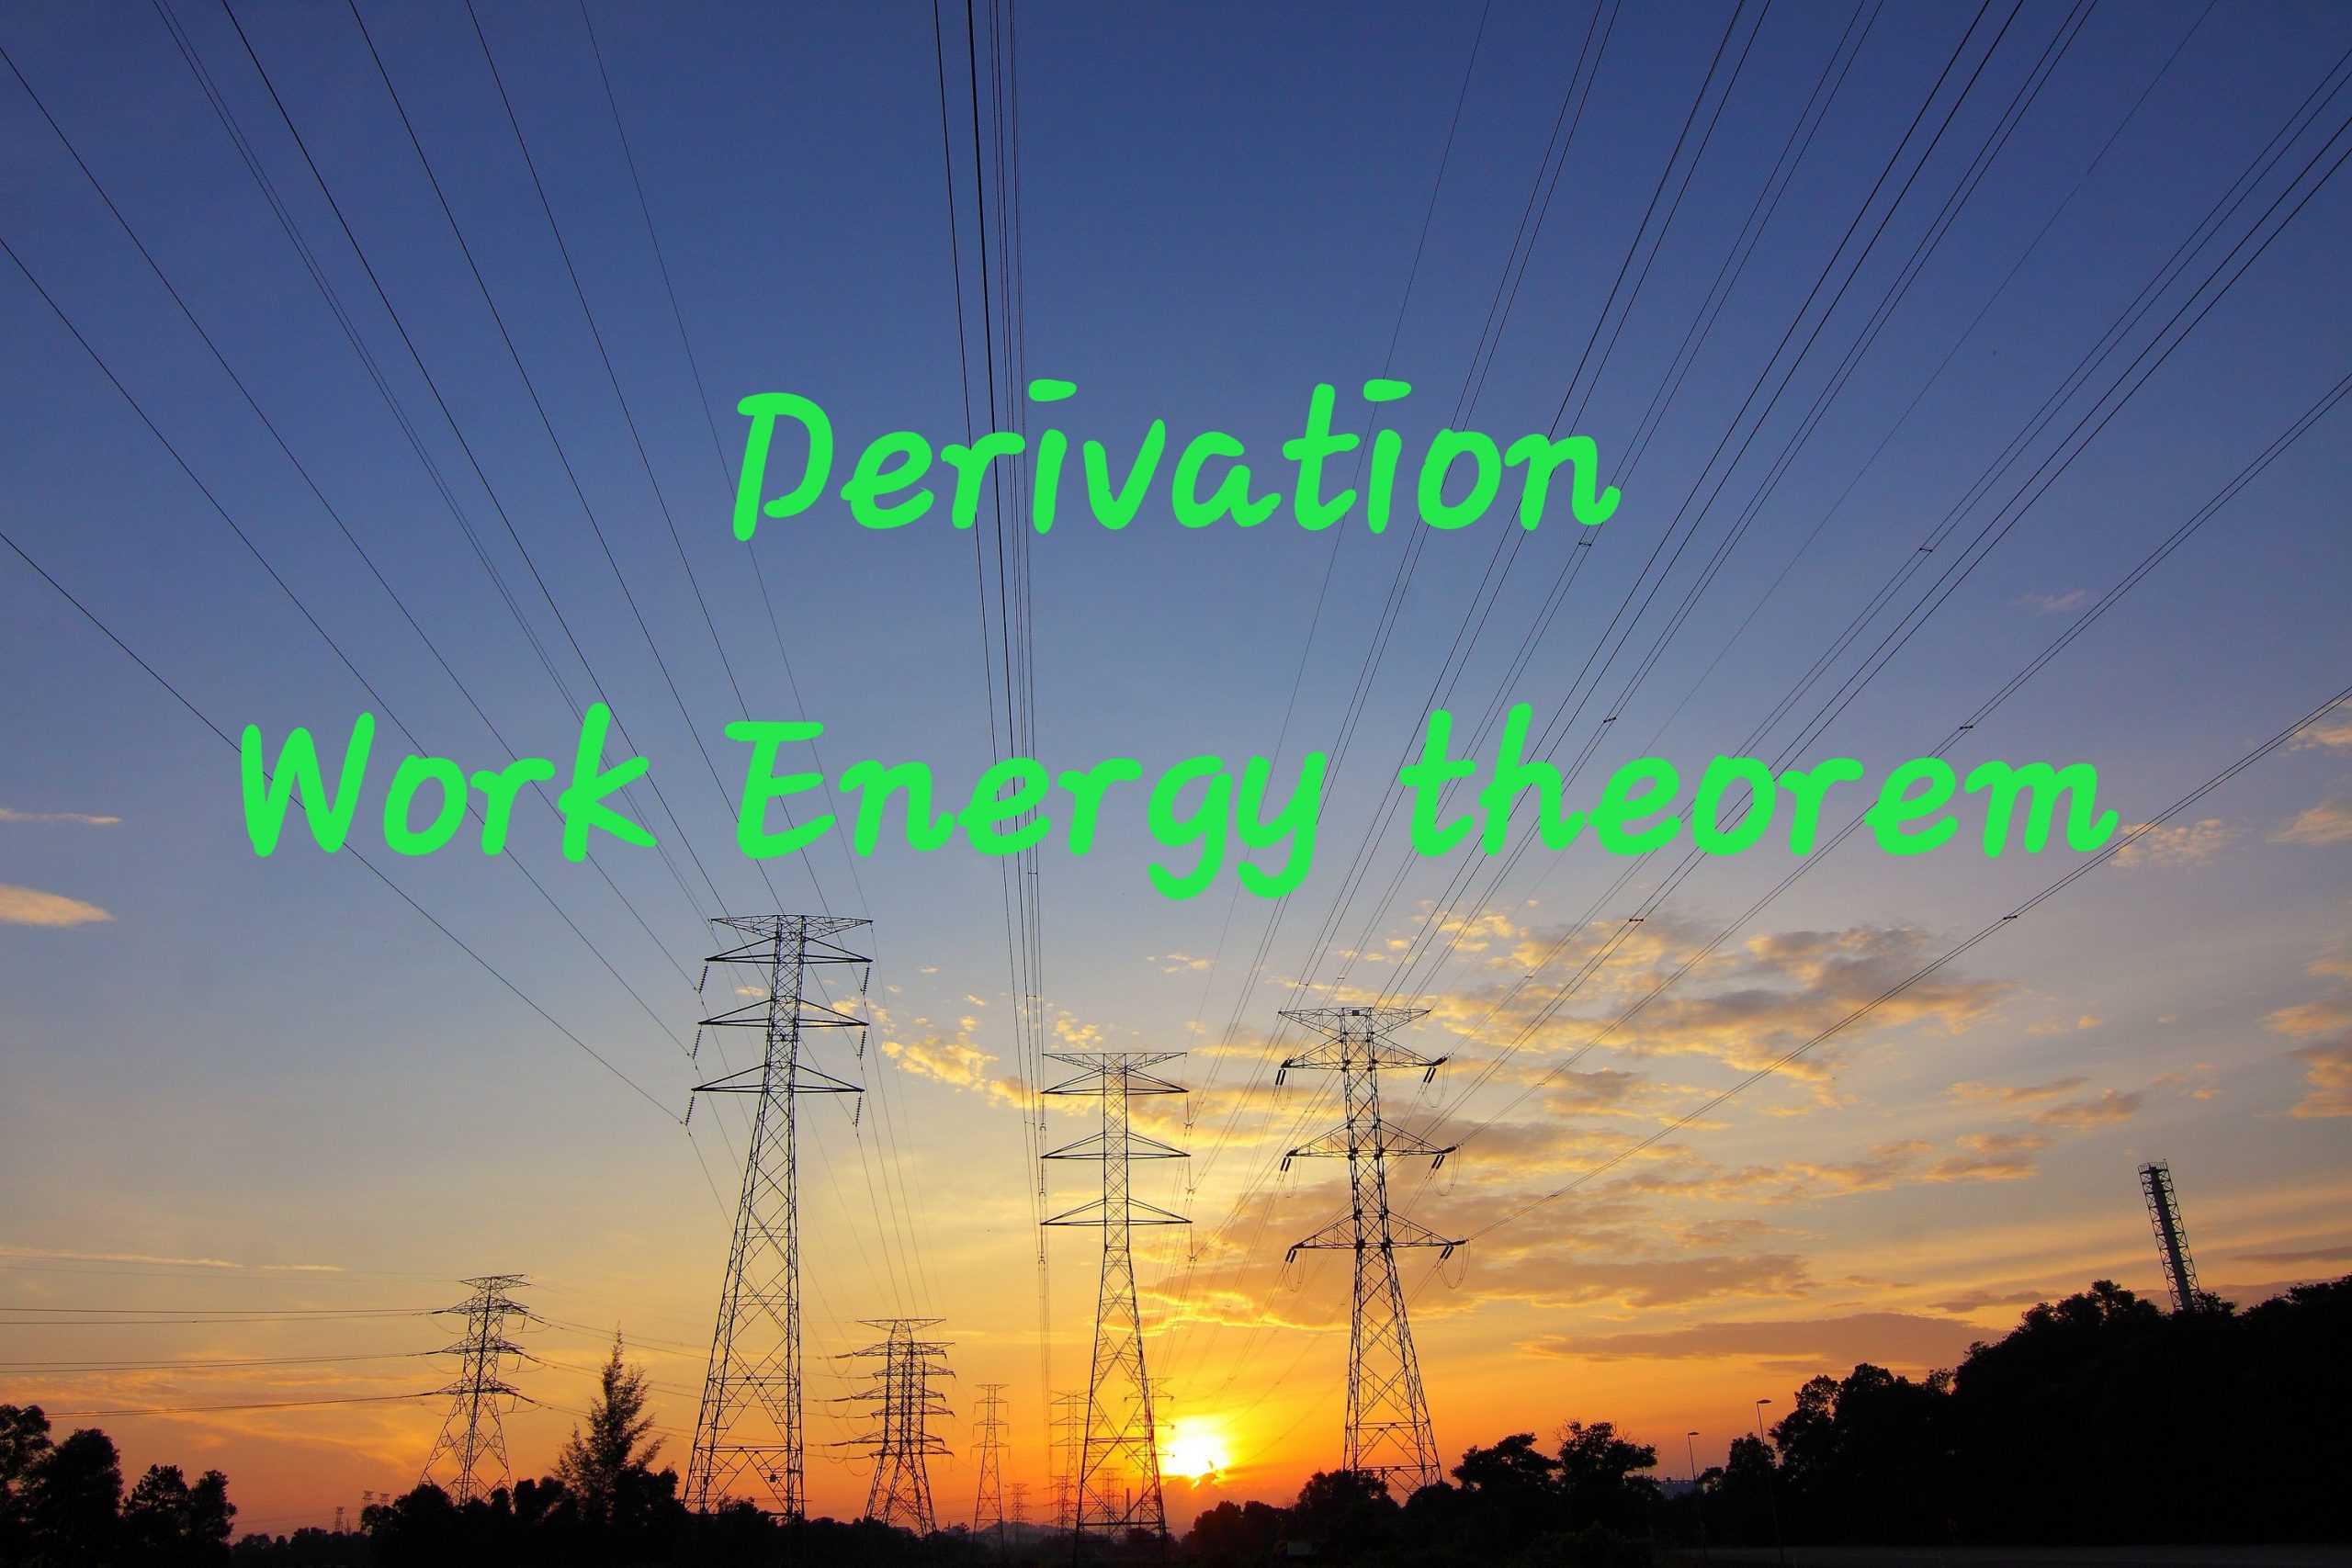 Derivation of work energy theorem class 11 | 2 cases rotational and translational